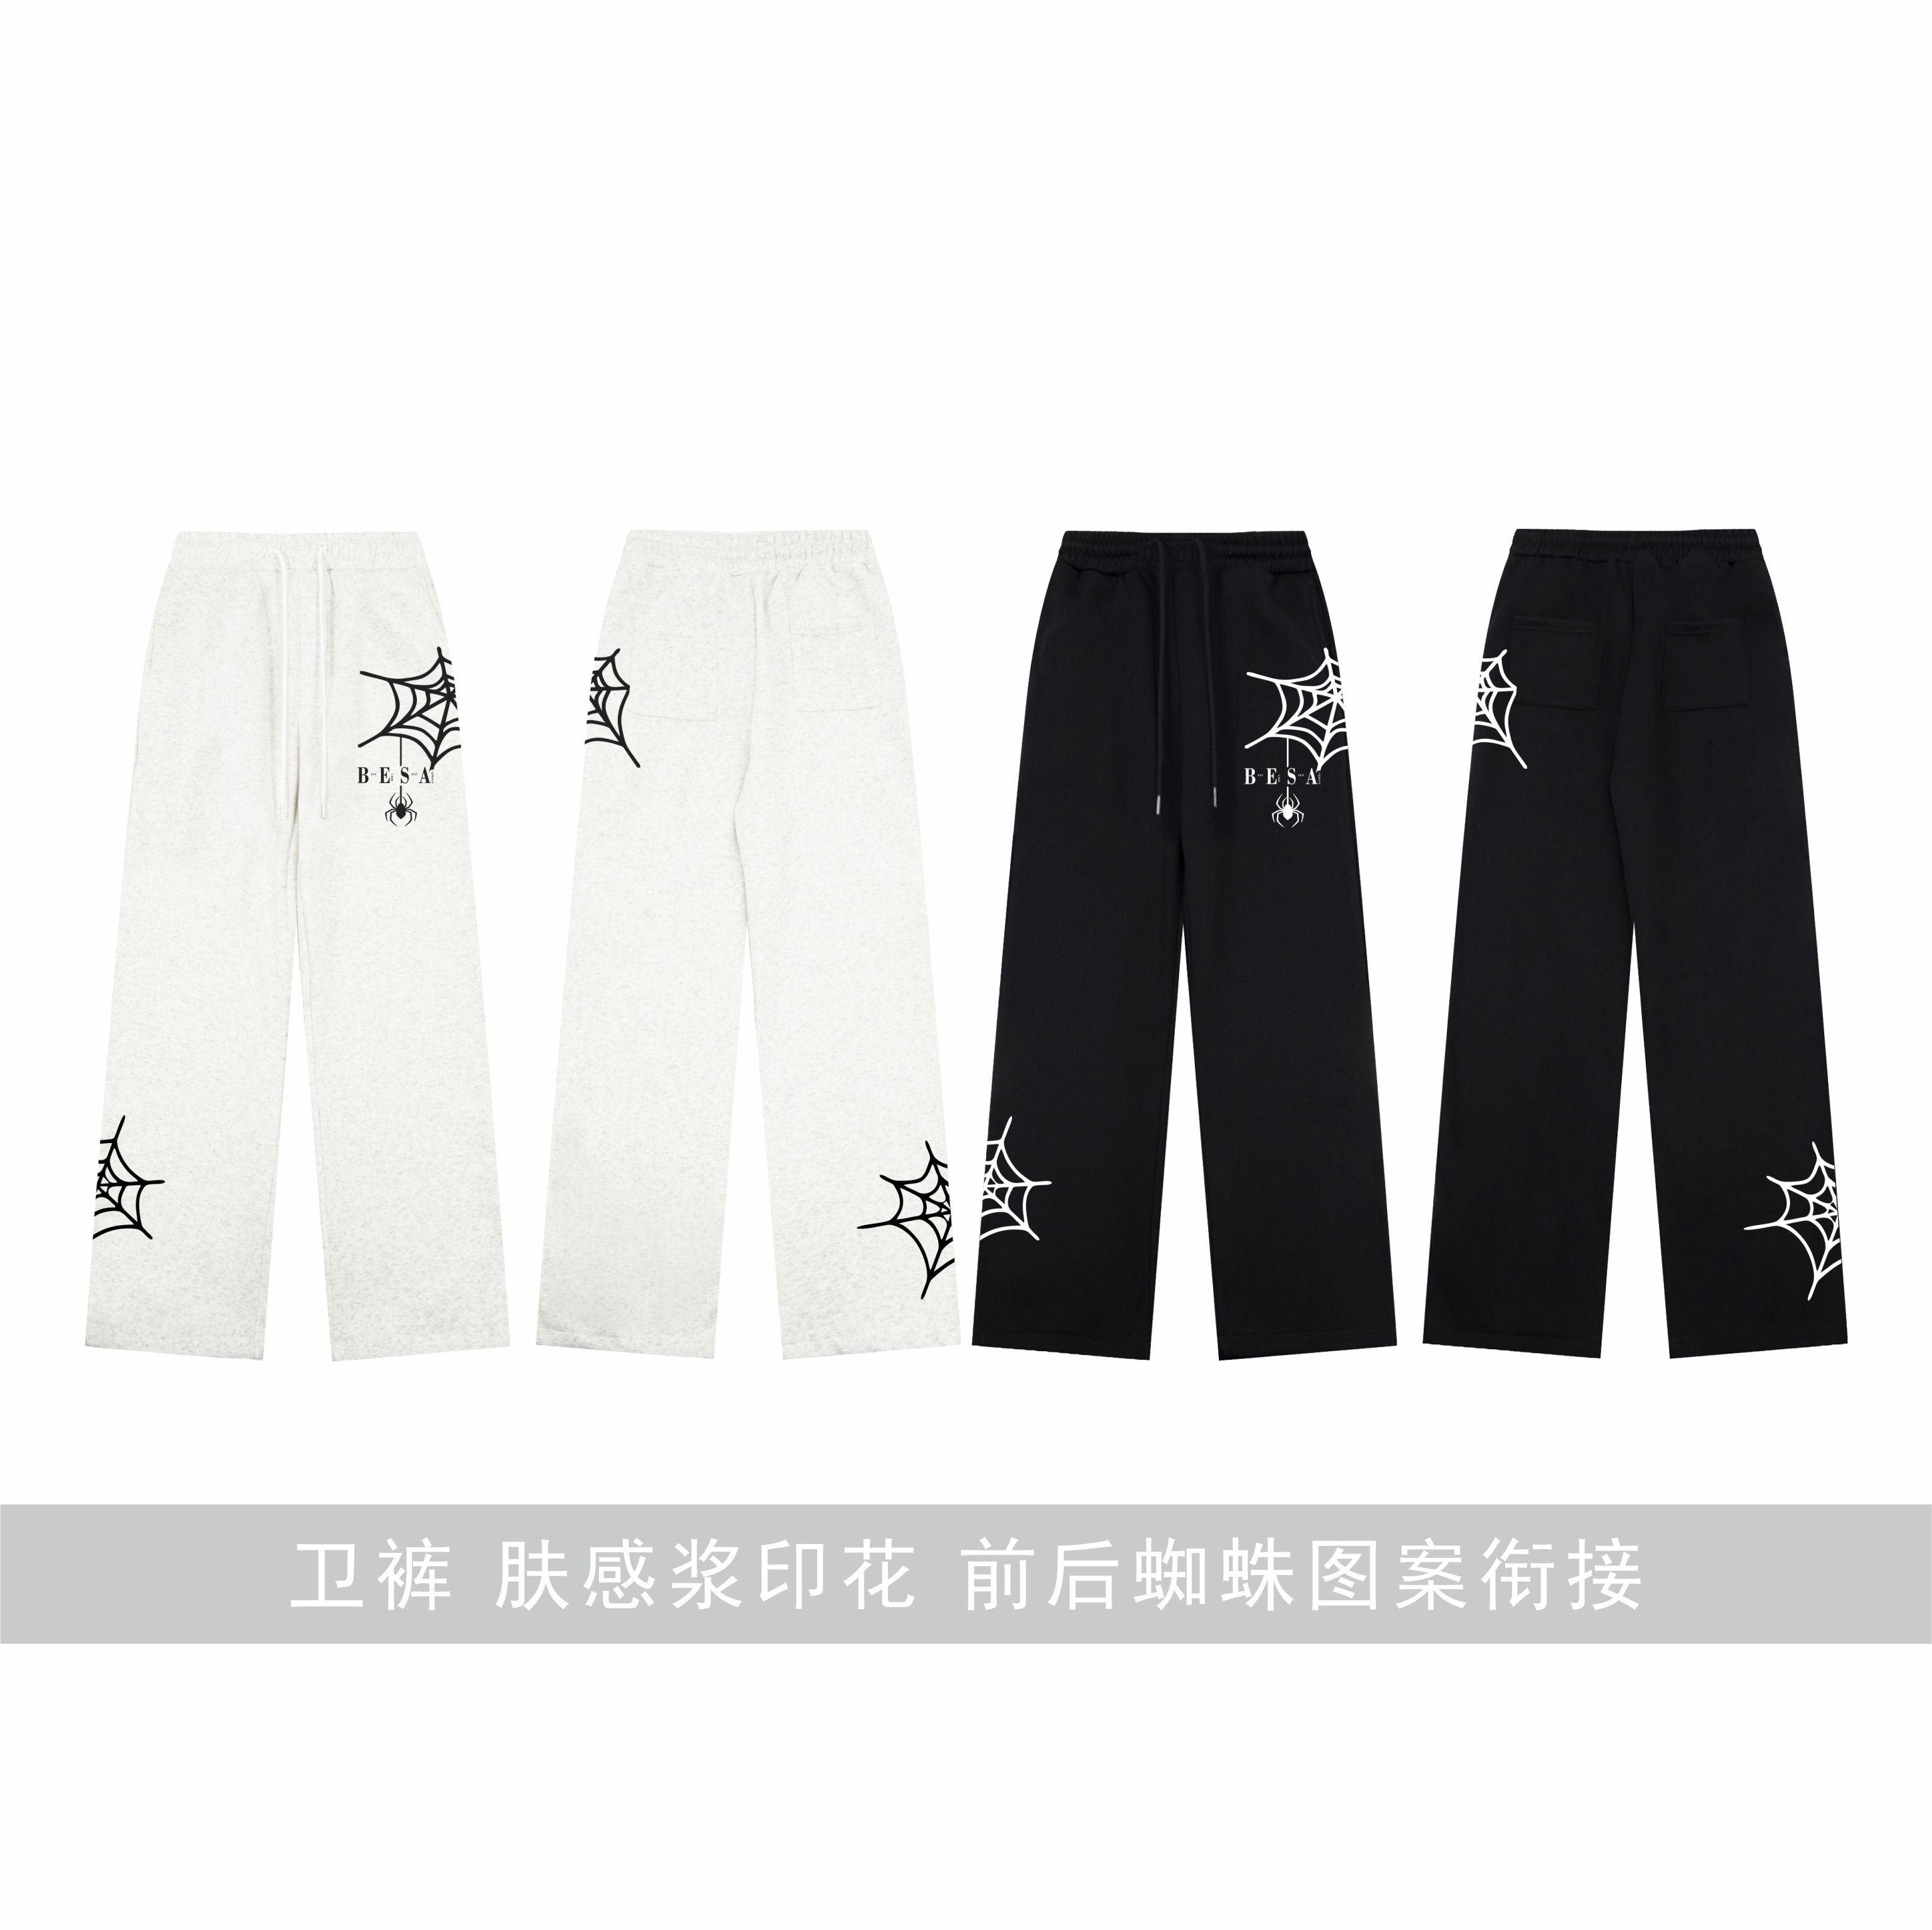 Faire Echo Spider patterned casual straight leg pants